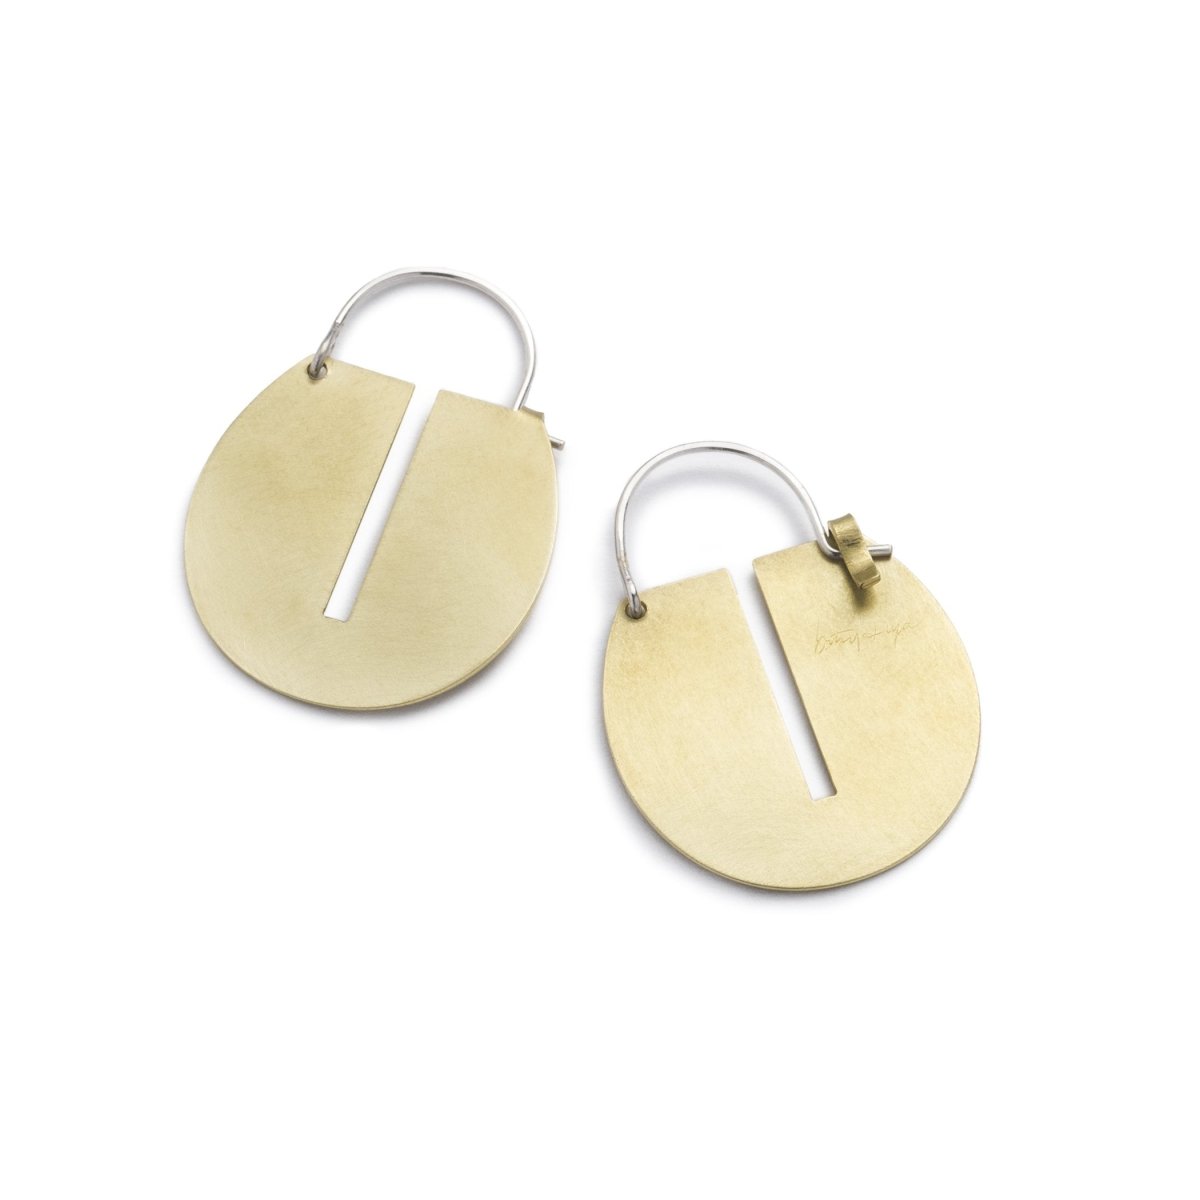 Small, round, brushed brass disc hoop earrings with a thin, rectangular cutout running down the center of the discs, and short, sterling silver earring wires that latch to the back of the discs. Hand-crafted in Portland, Oregon.